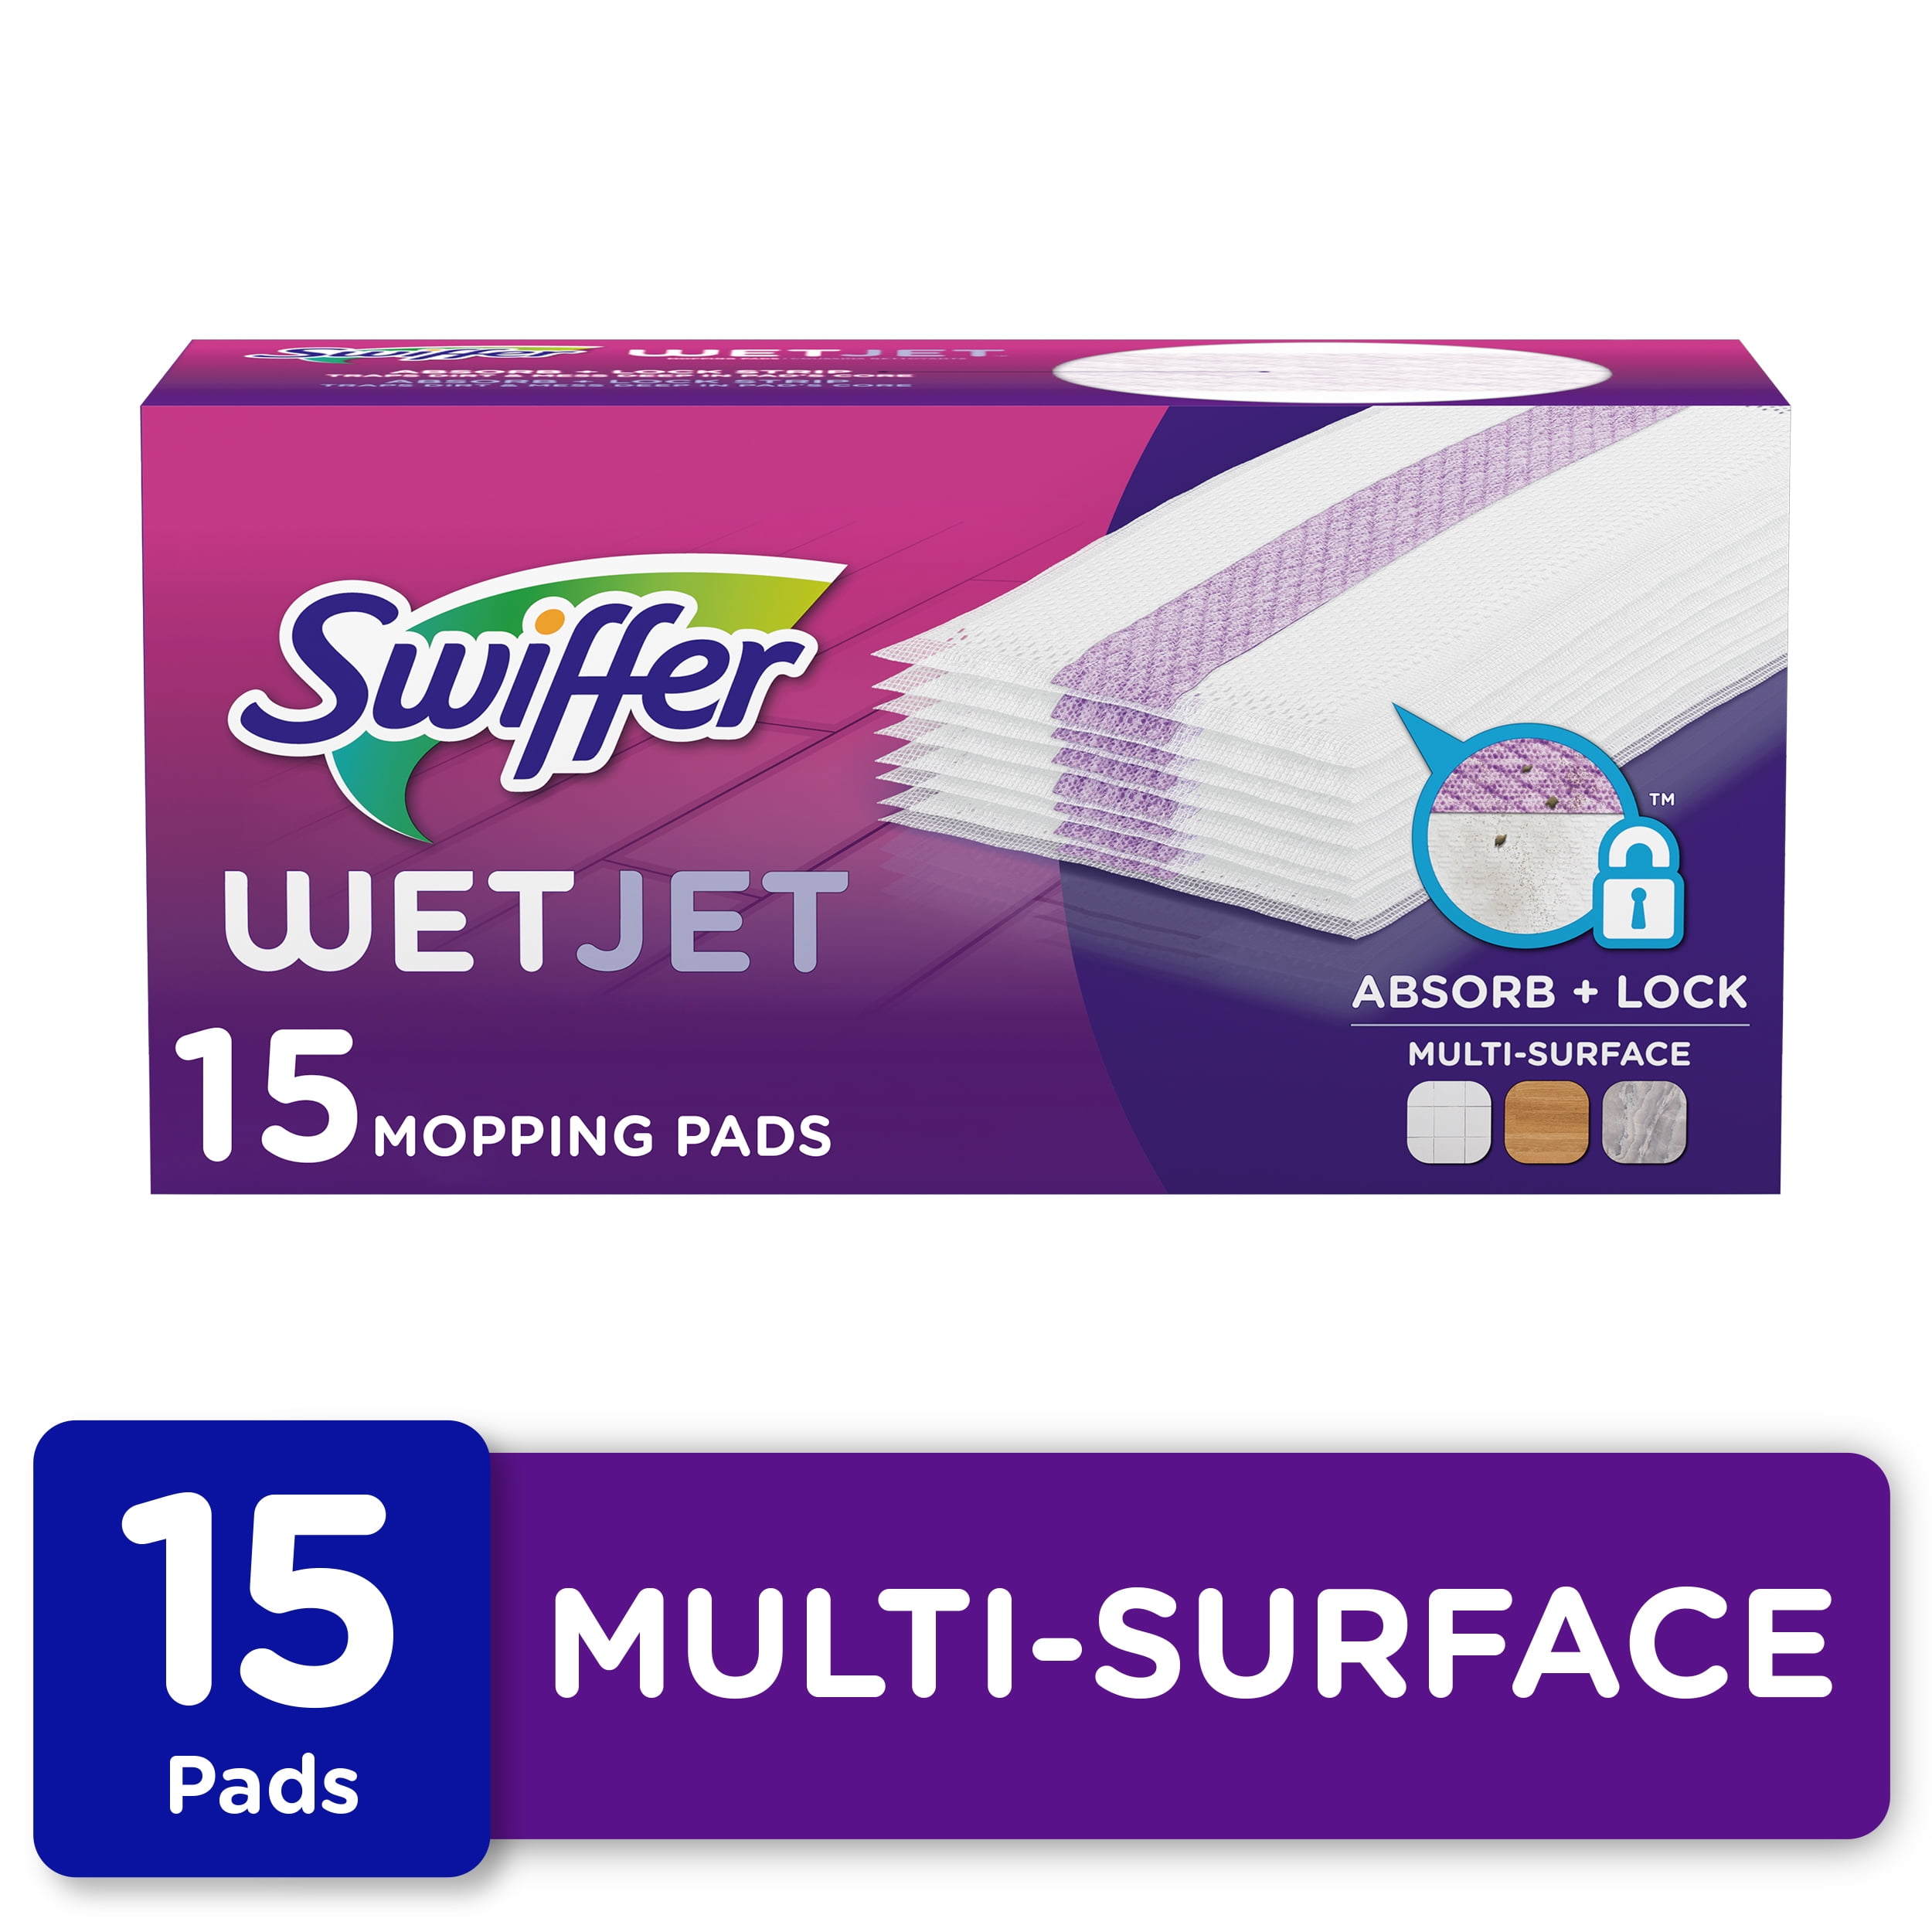 Swiffer WetJet Spray Mop Multi-Surface Mopping Pads for Floor Cleaning, 15 Count